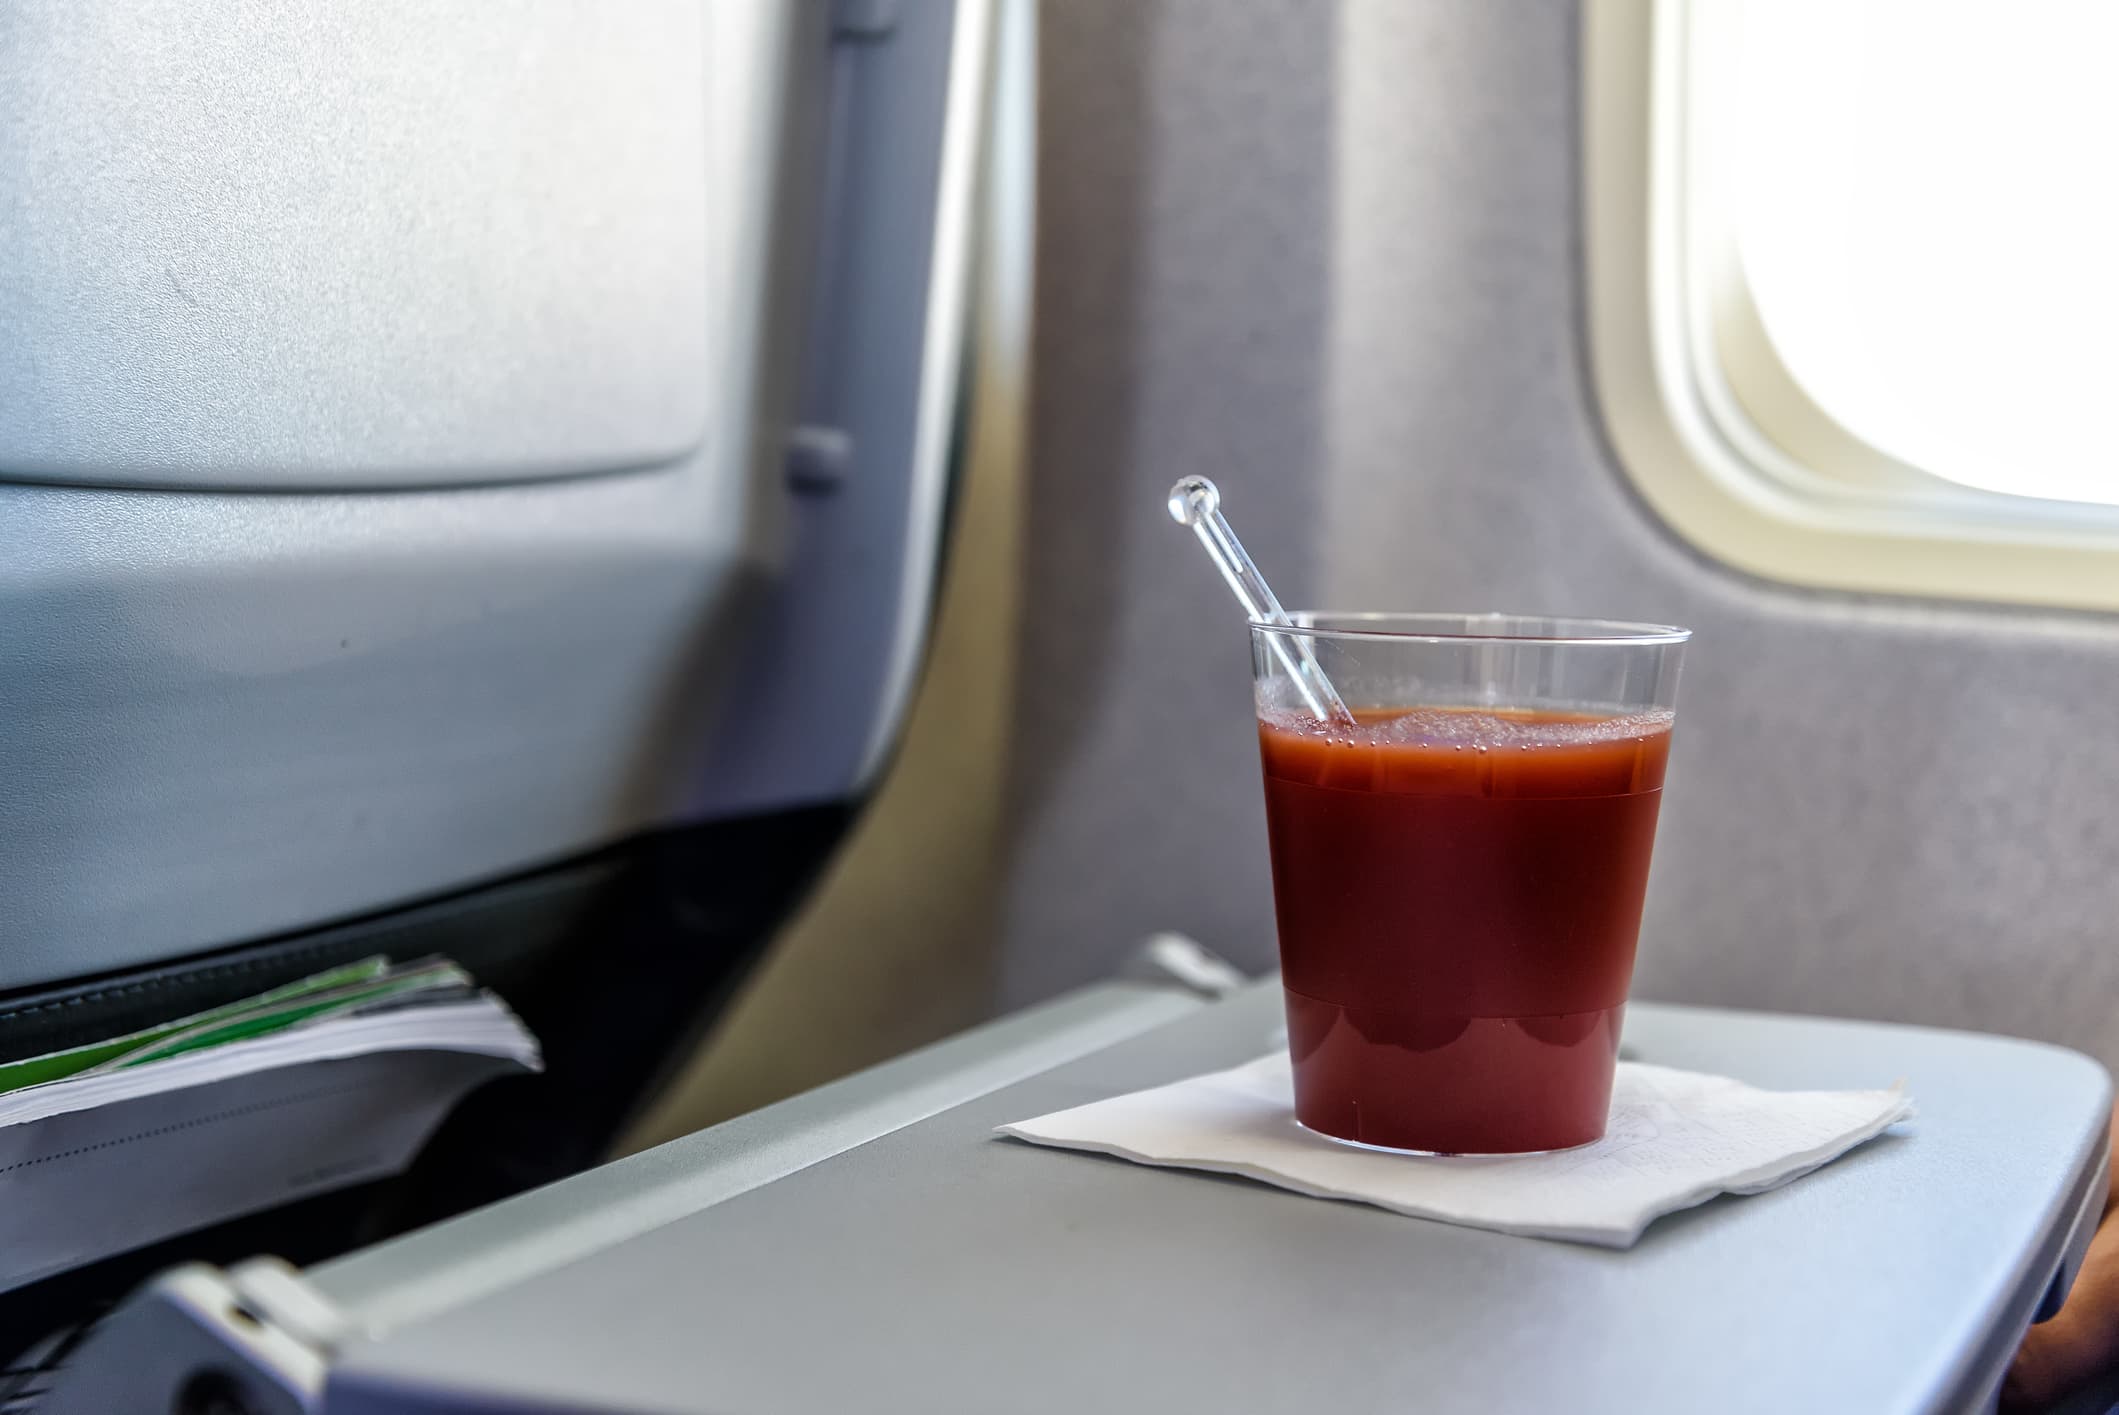 A view of a glass of tomato juice on an airplane tray.